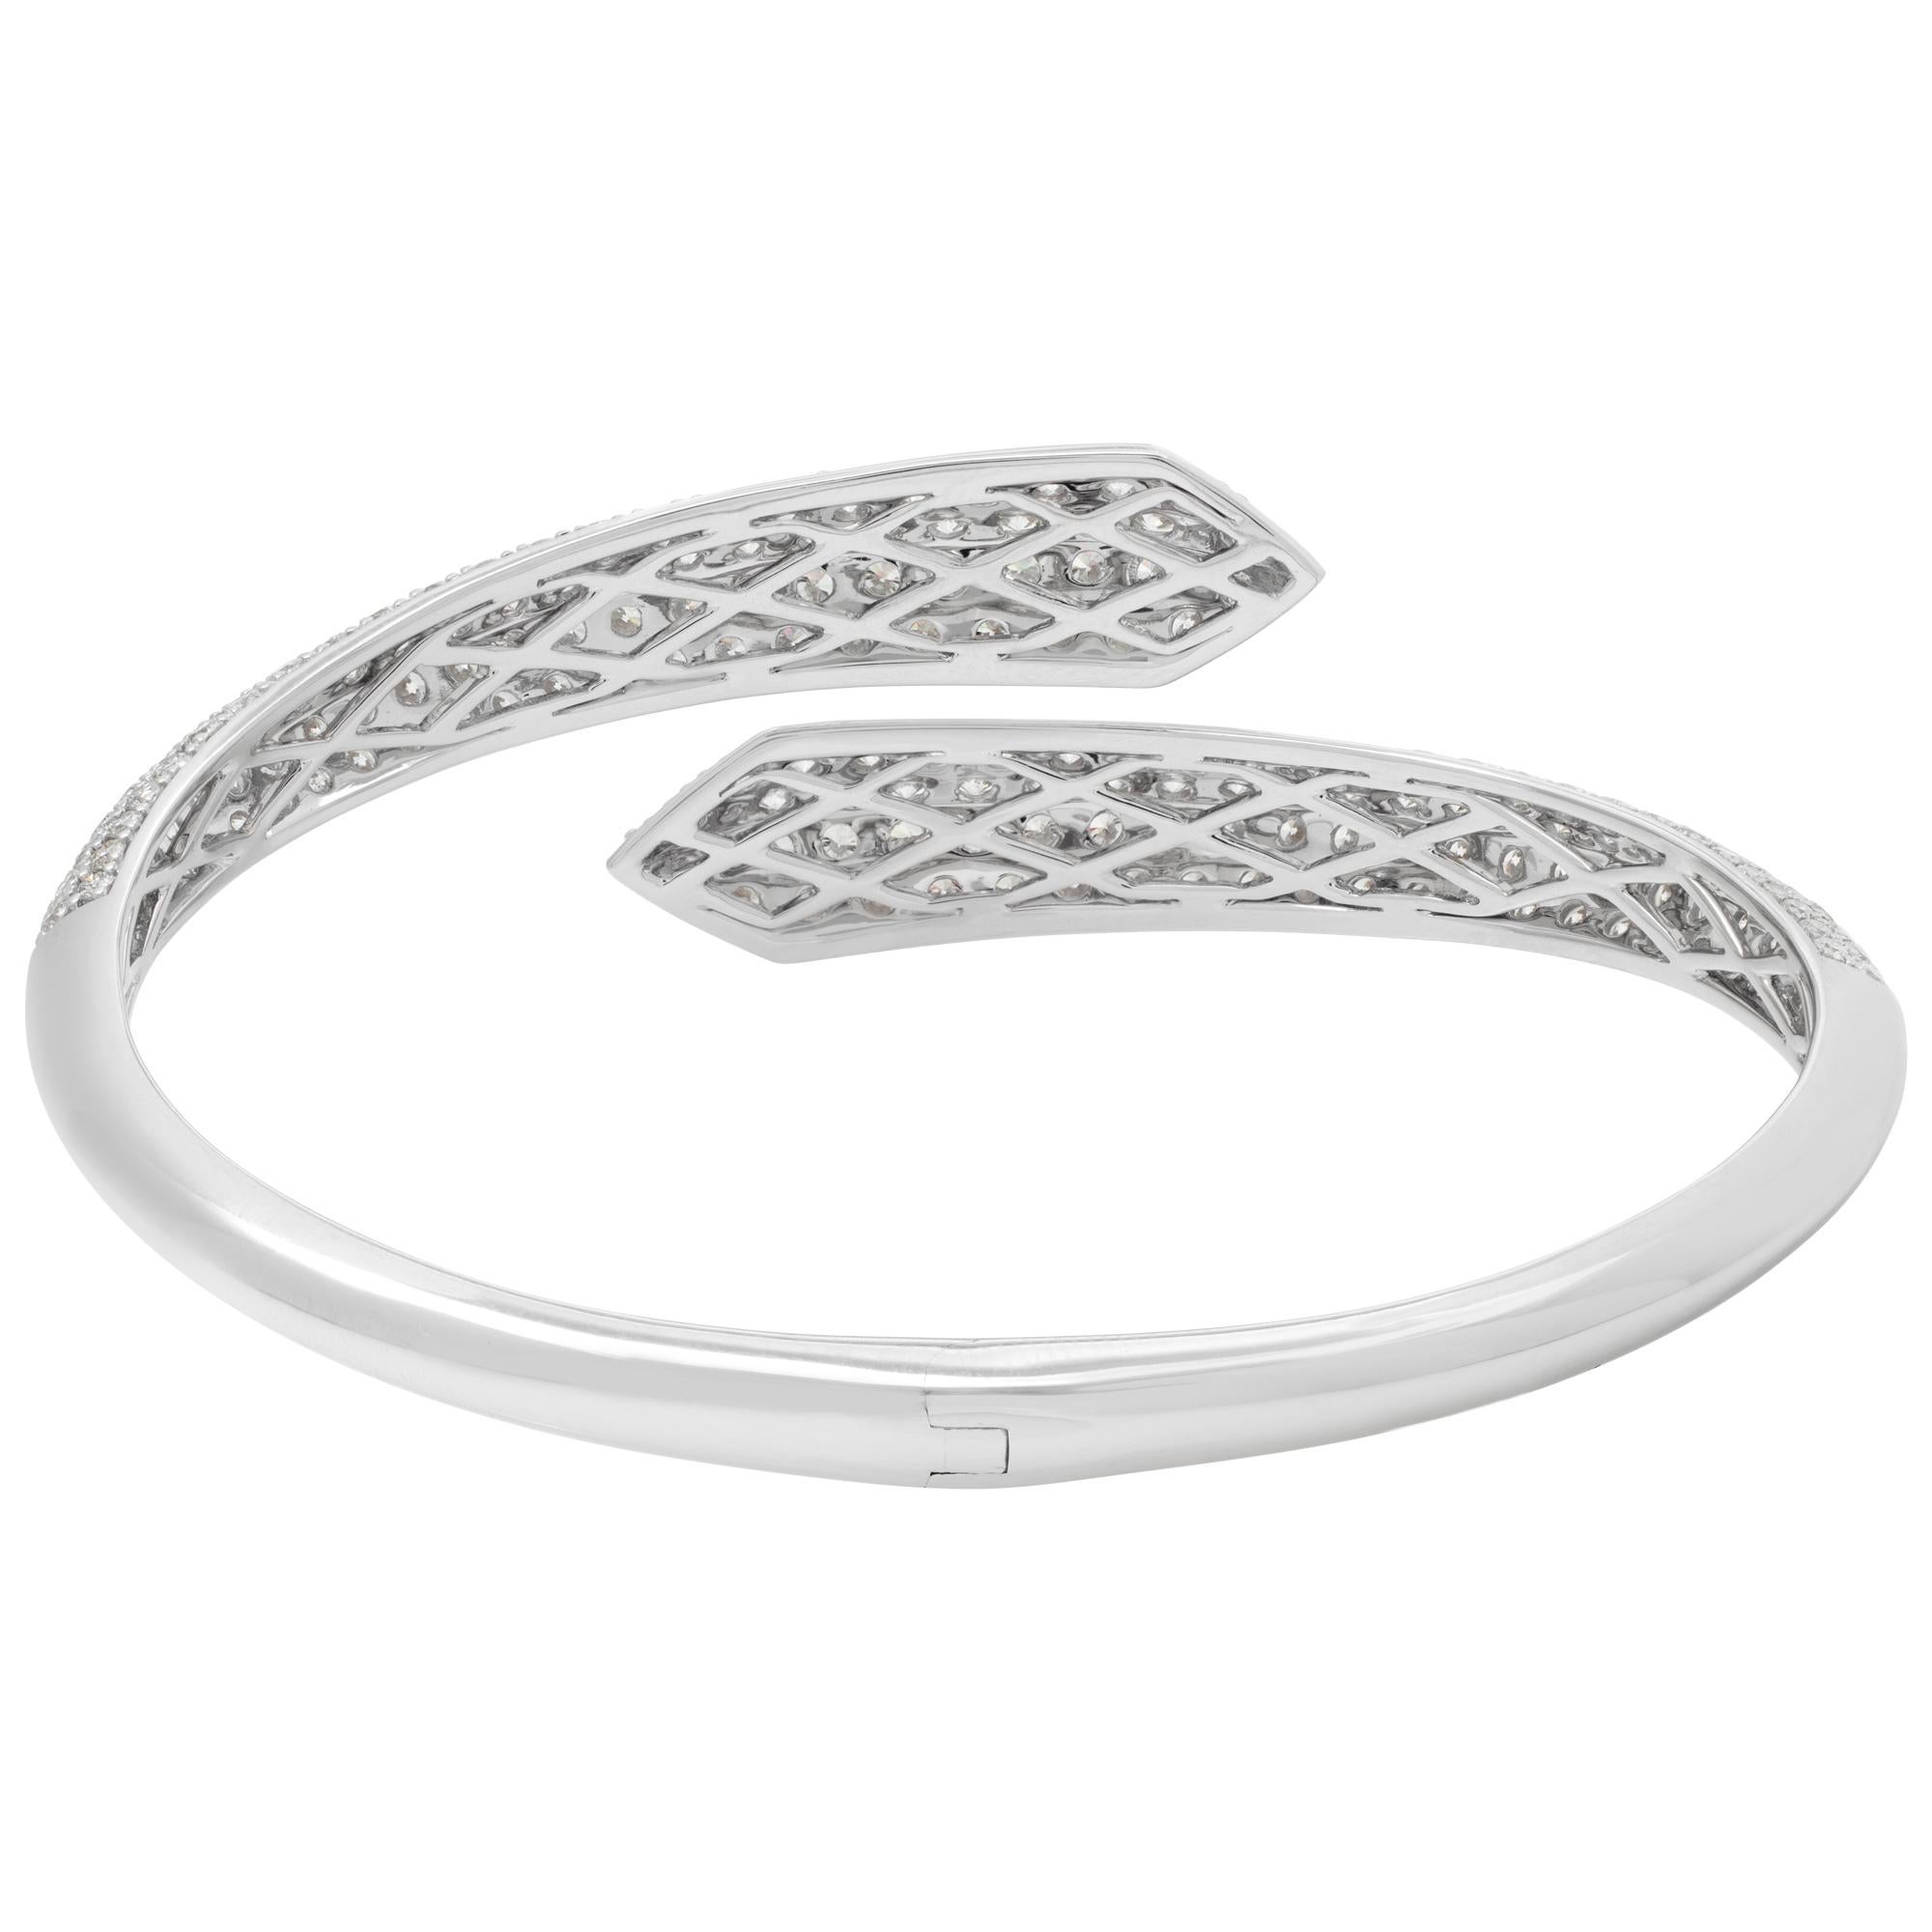 Diamond crossover semi eternity bangle with diamonds In Excellent Condition For Sale In Surfside, FL